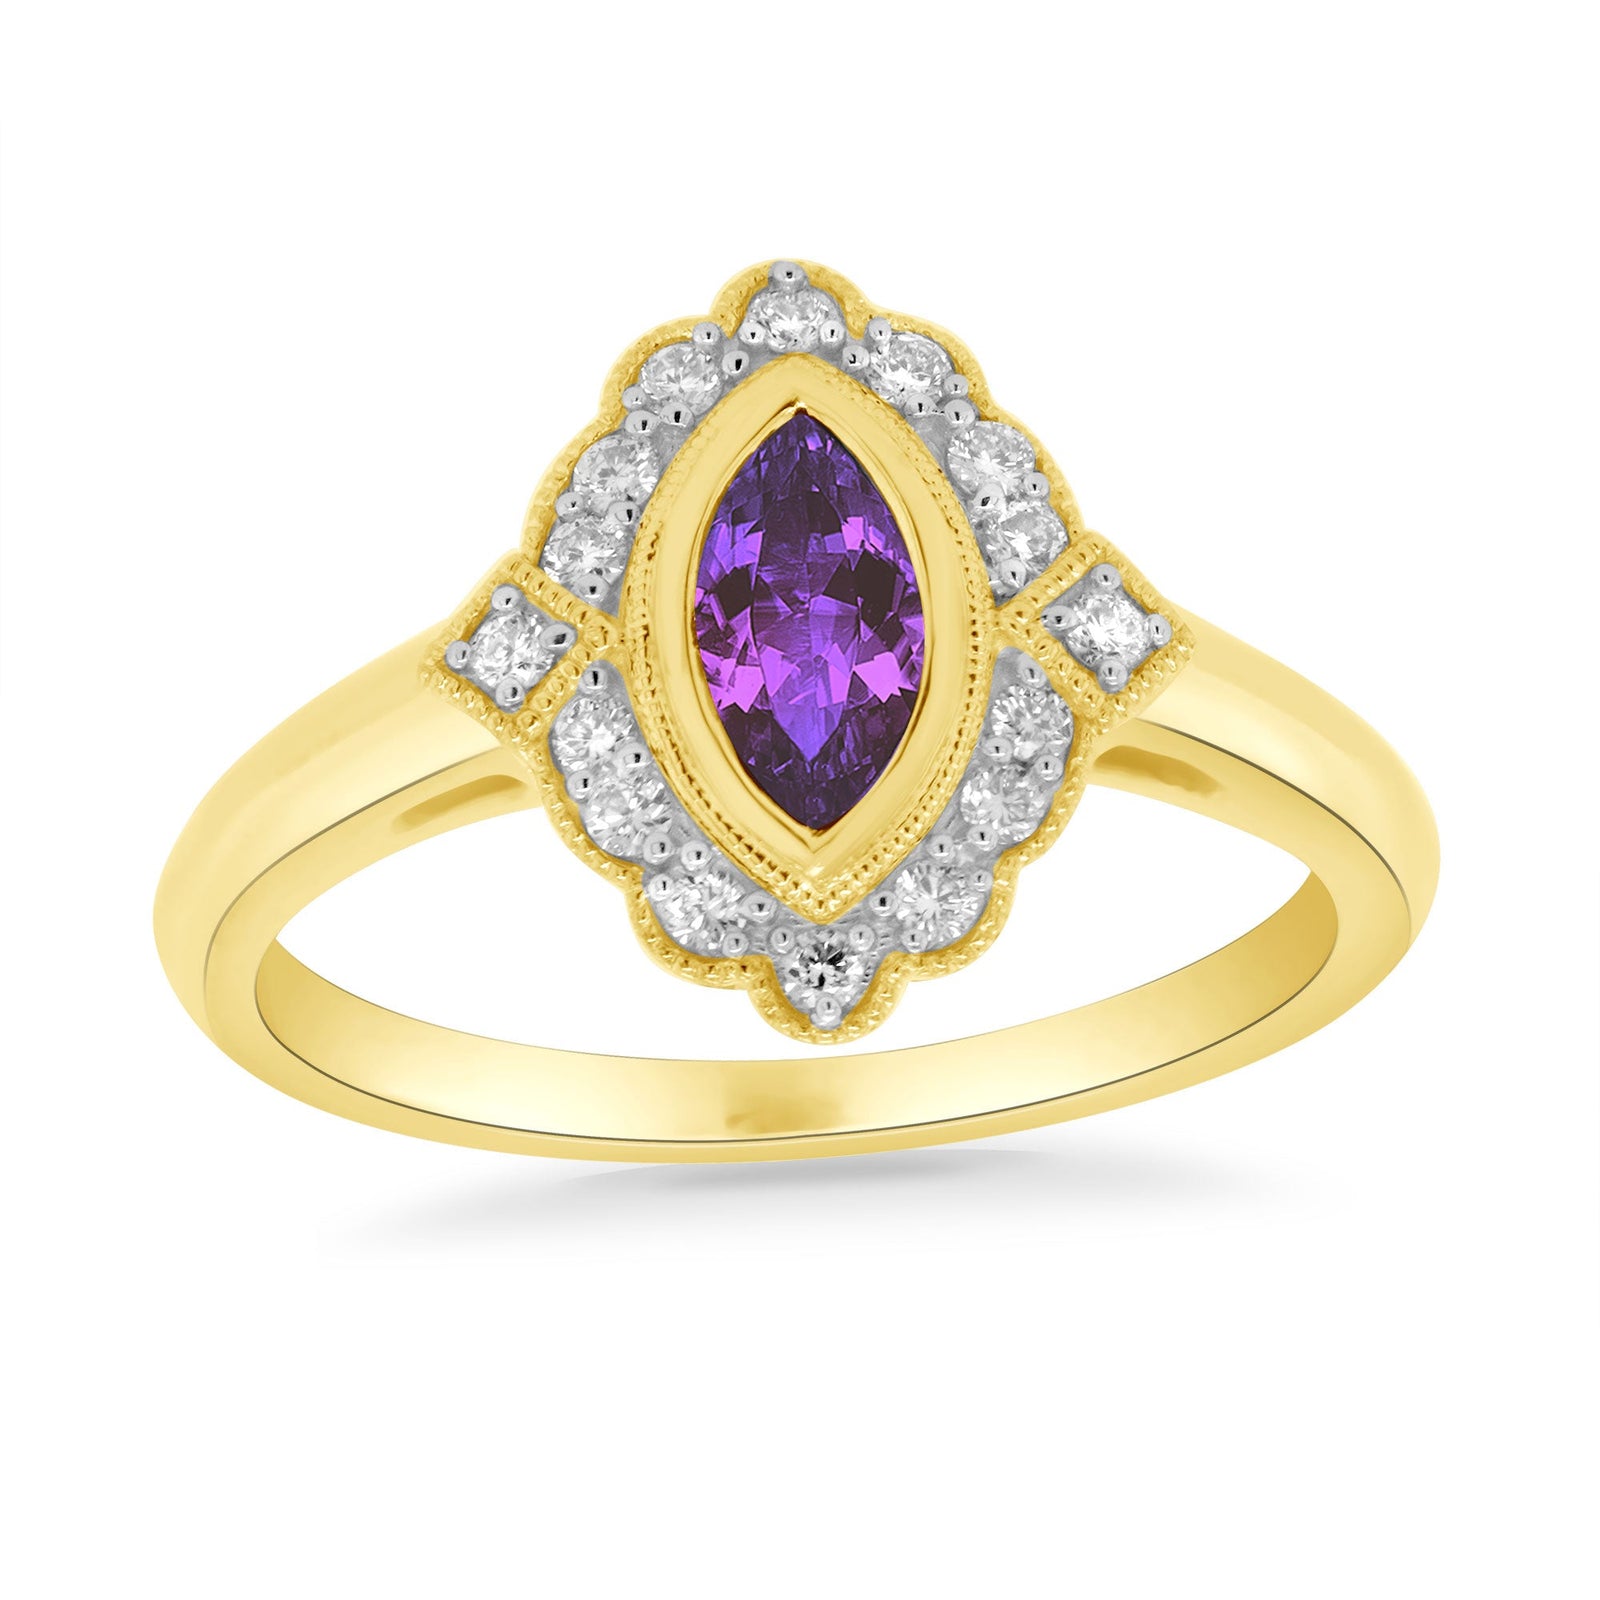 9ct gold 8x4mm marquise shape amethyst & antique style diamond cluster ring 0.15ct